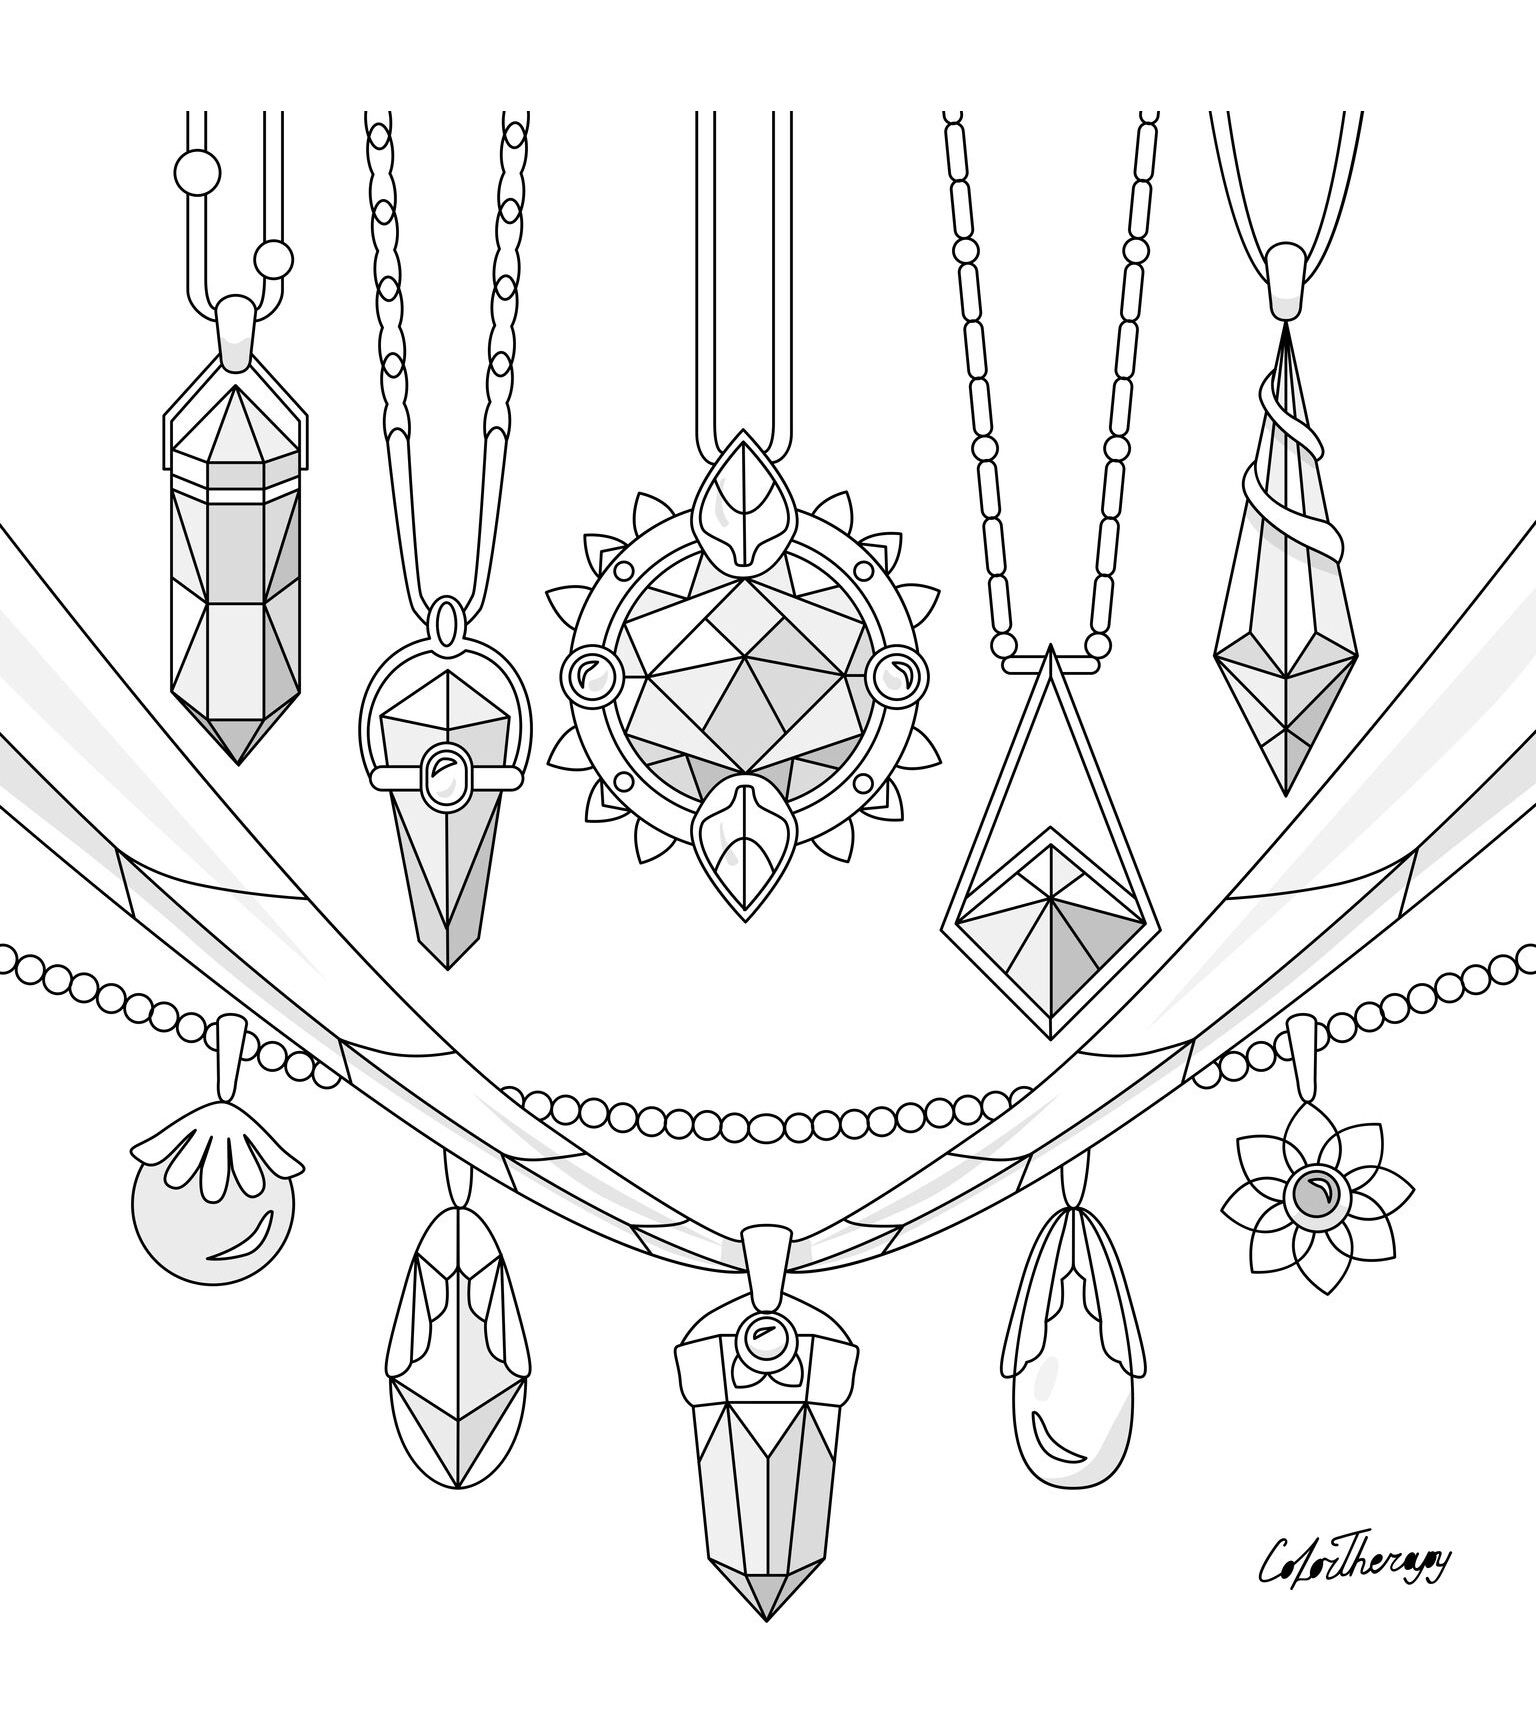 Pin by tanguy.mariehelene on Coloriage | Cute coloring pages, Coloring pages,  Crystal drawing